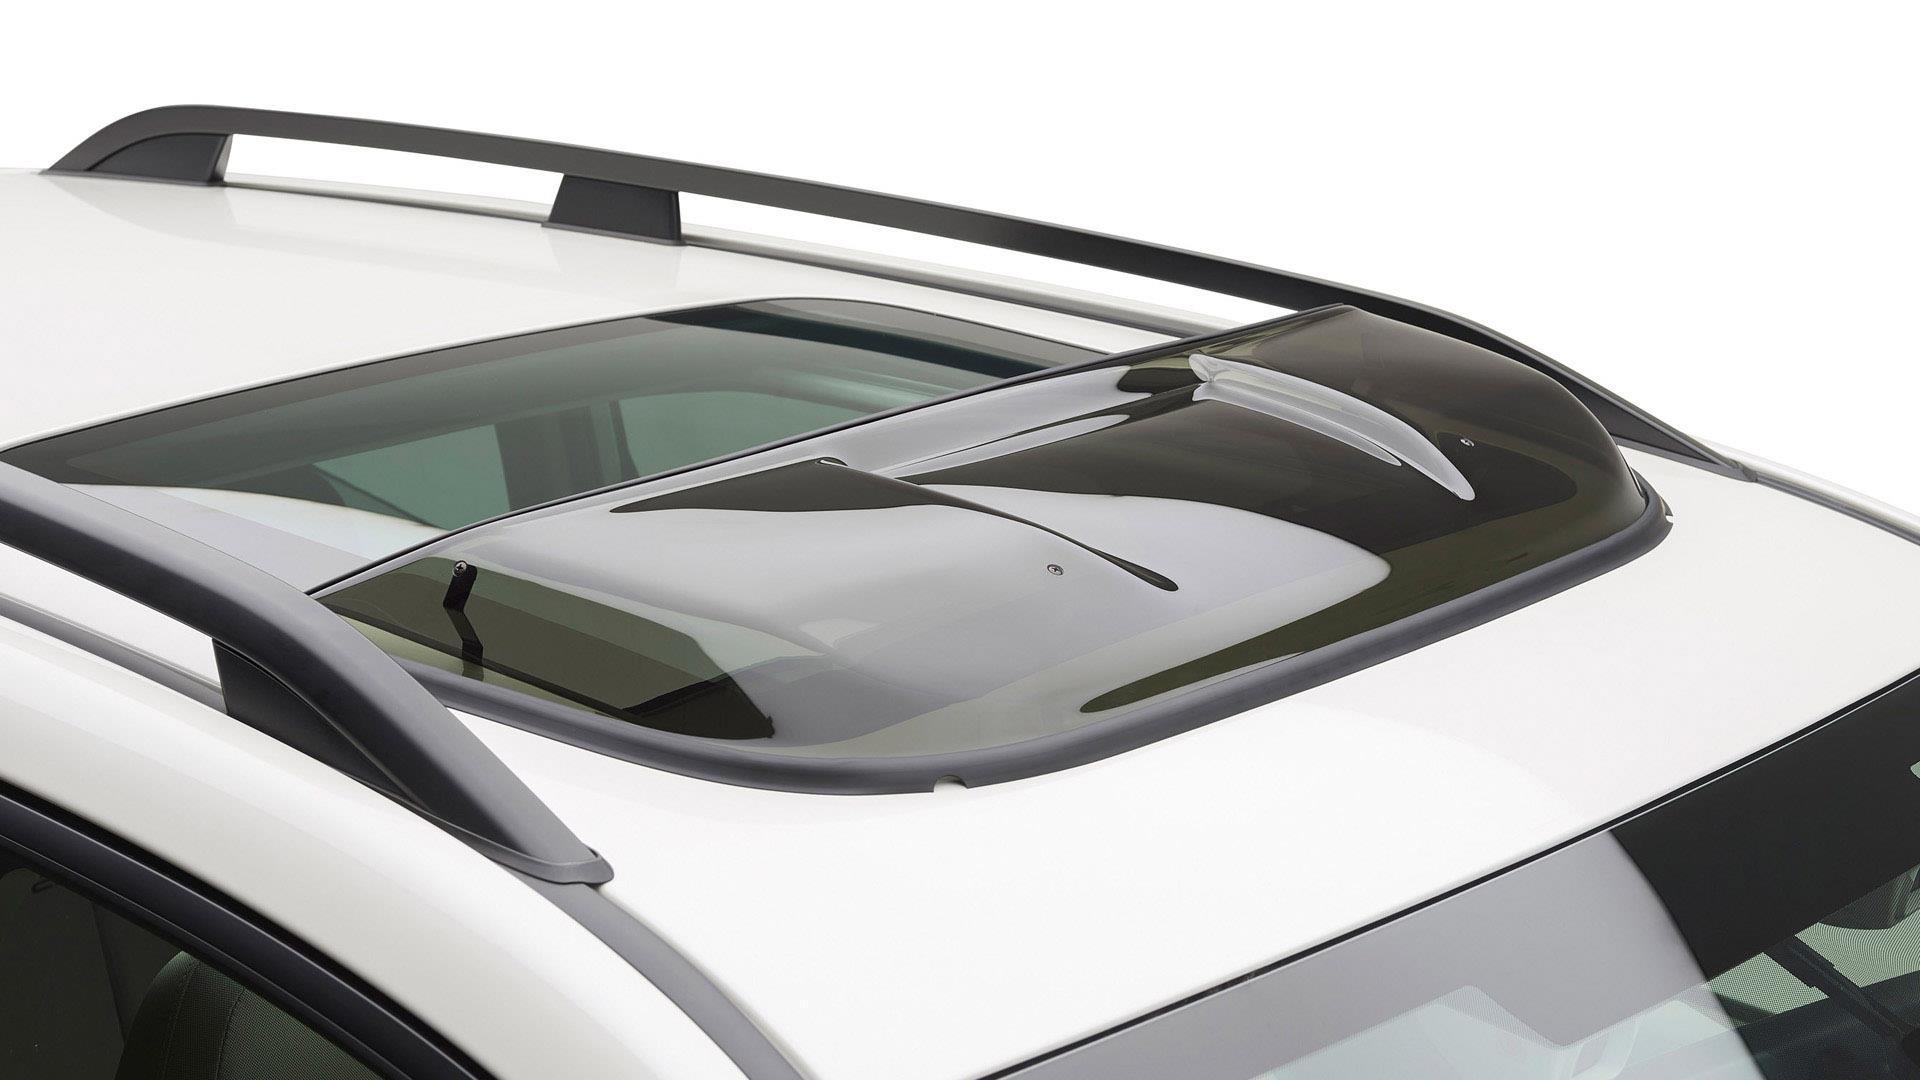 2022 Subaru Ascent Moonroof Air Deflector. Helps reduce wind noise and